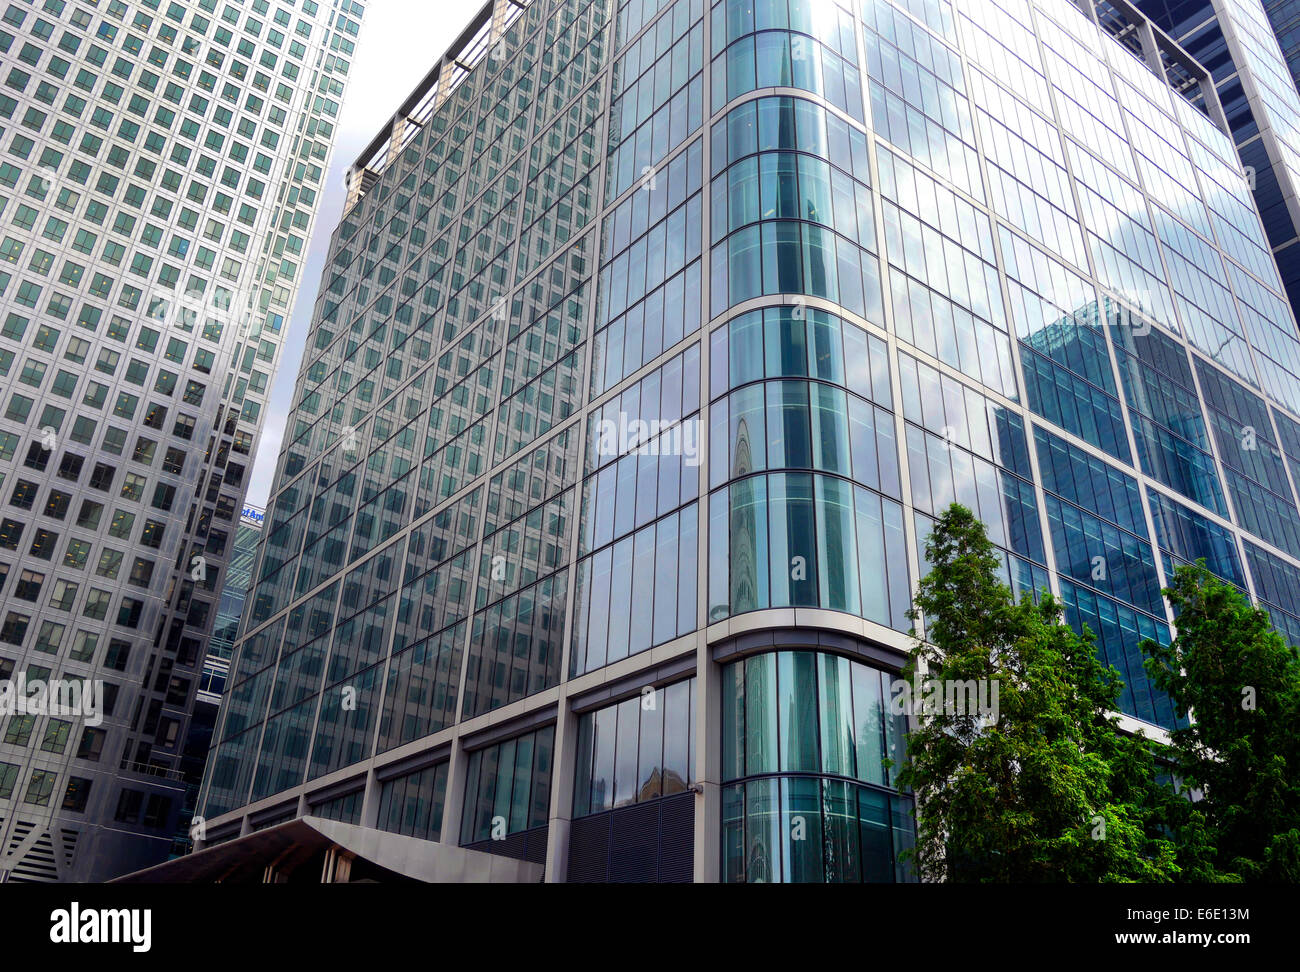 Glass-clad office facades canary wharf, London Docklands Stock Photo